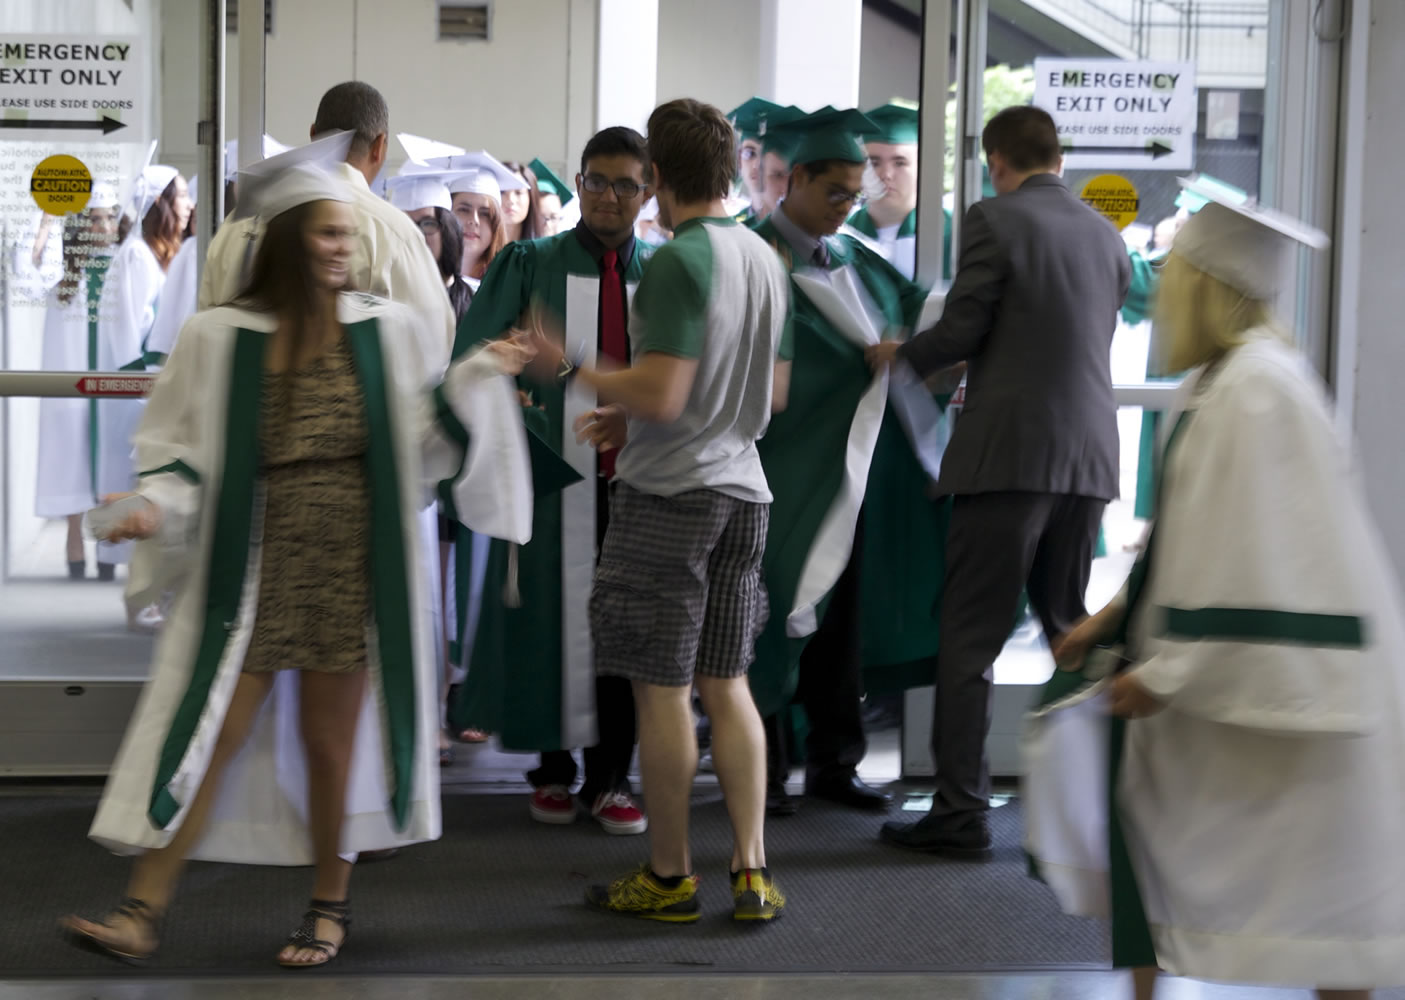 Students open their gowns as they enter the building Thursday for the Reynolds High School graduation ceremony at Veterans Memorial Coliseum in Portland.